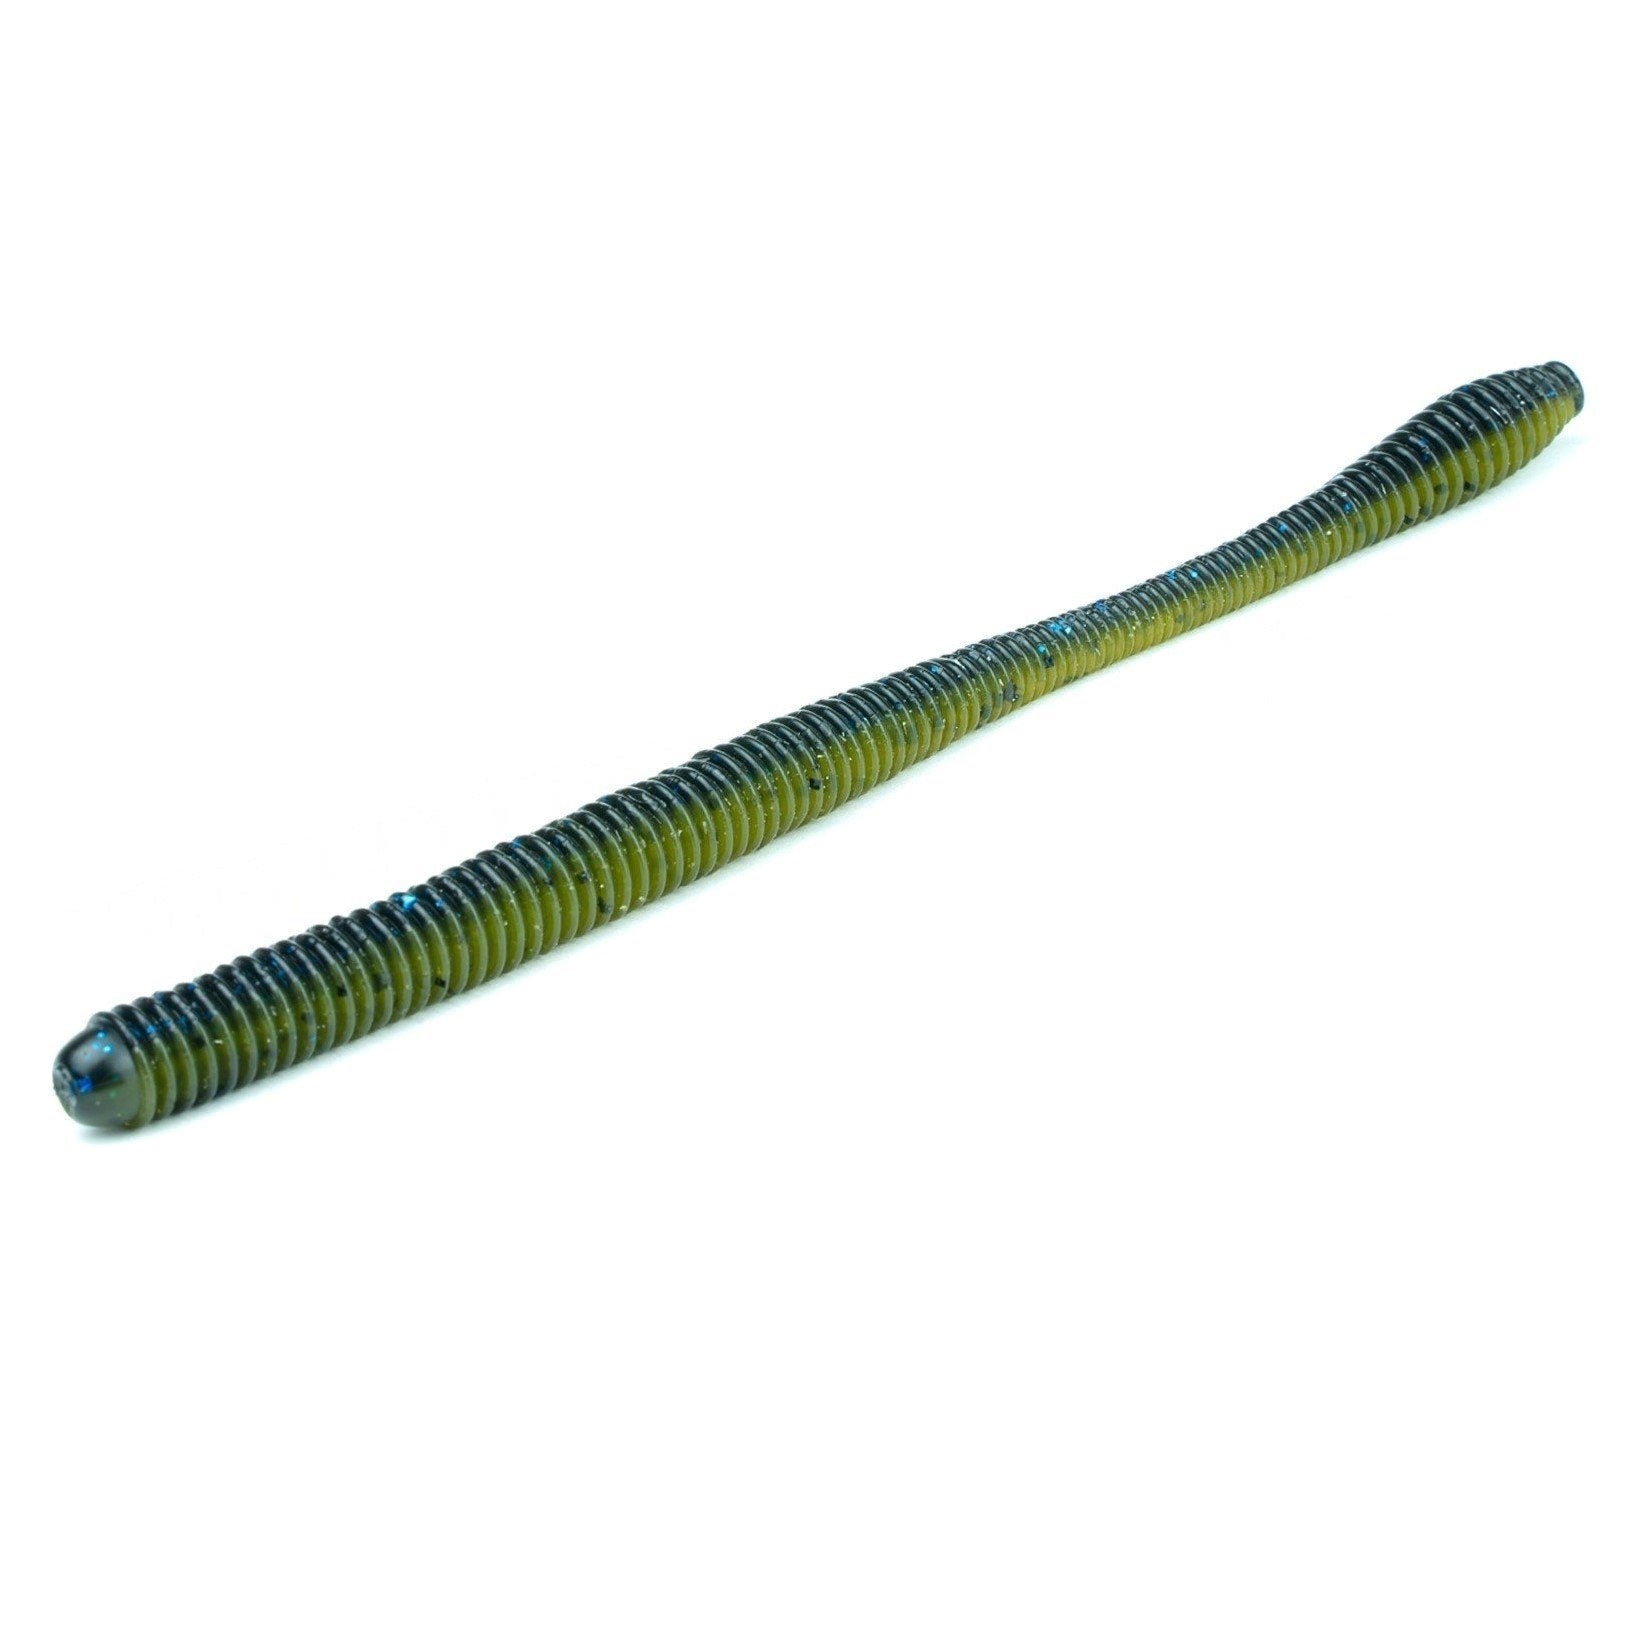 Buy Soft Plastic Worms Online, Bass Fishing Accessories, Soft Plastics  Straight Tail Worms